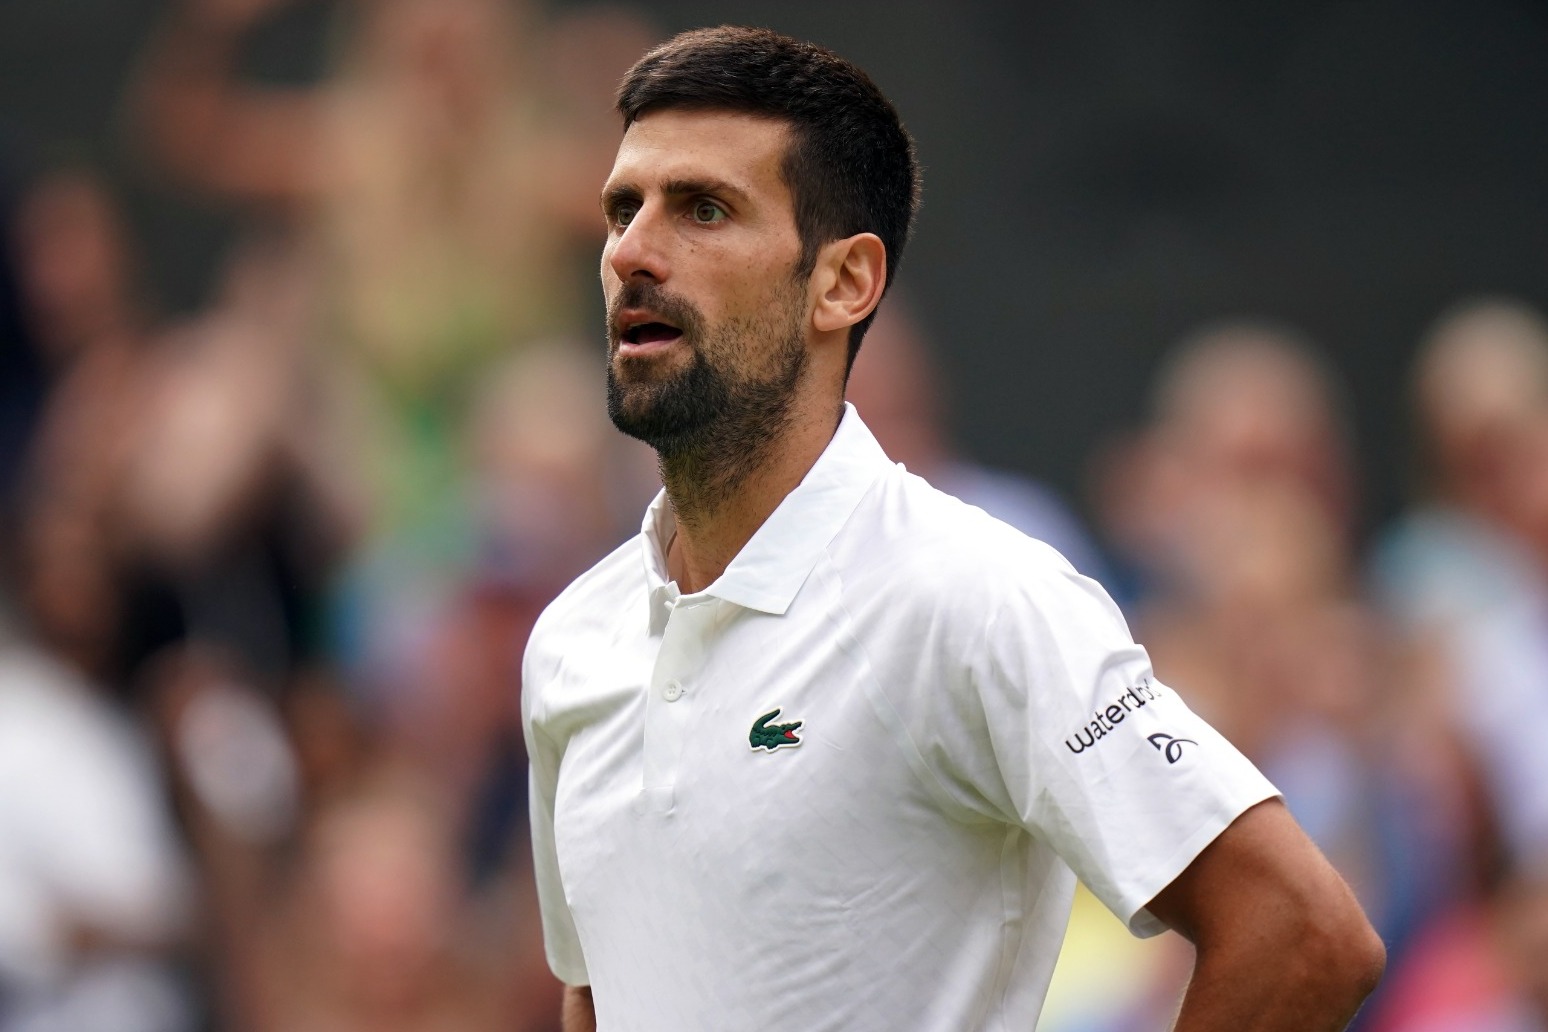 Novak Djokovic set for knee surgery which will rule him out of Wimbledon 